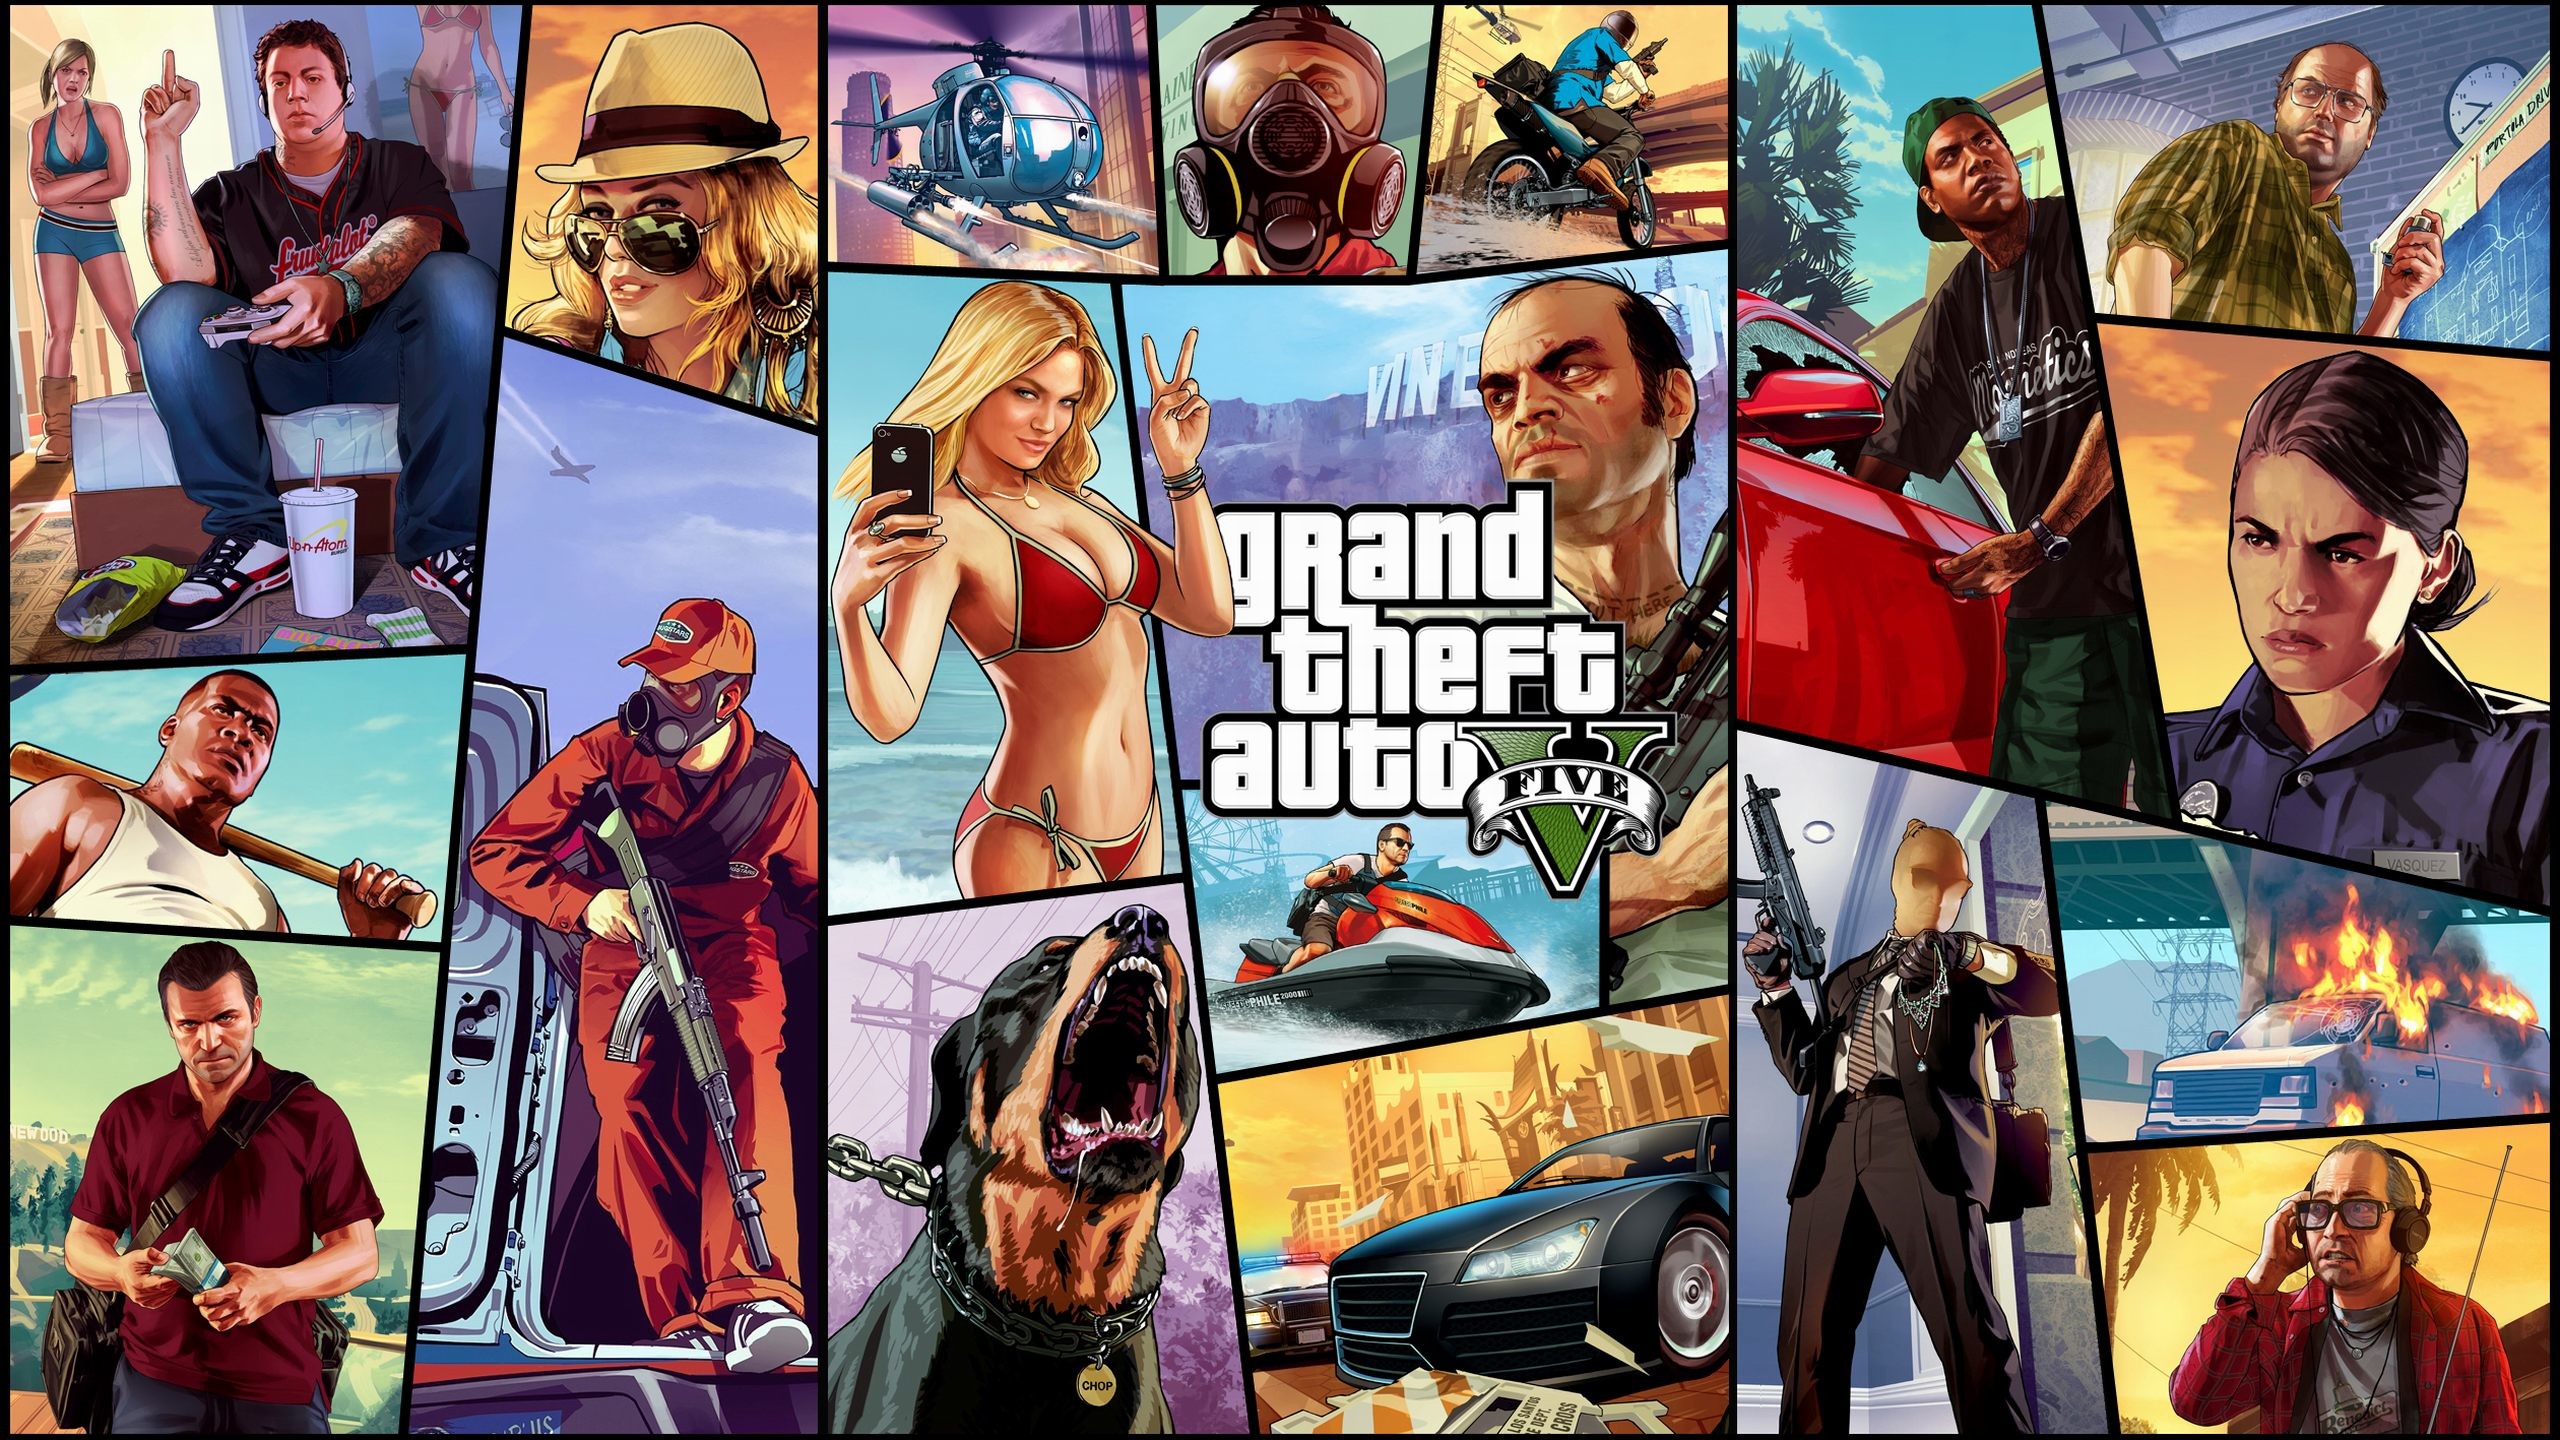 Grand theft auto wallpaper wallpapers browse